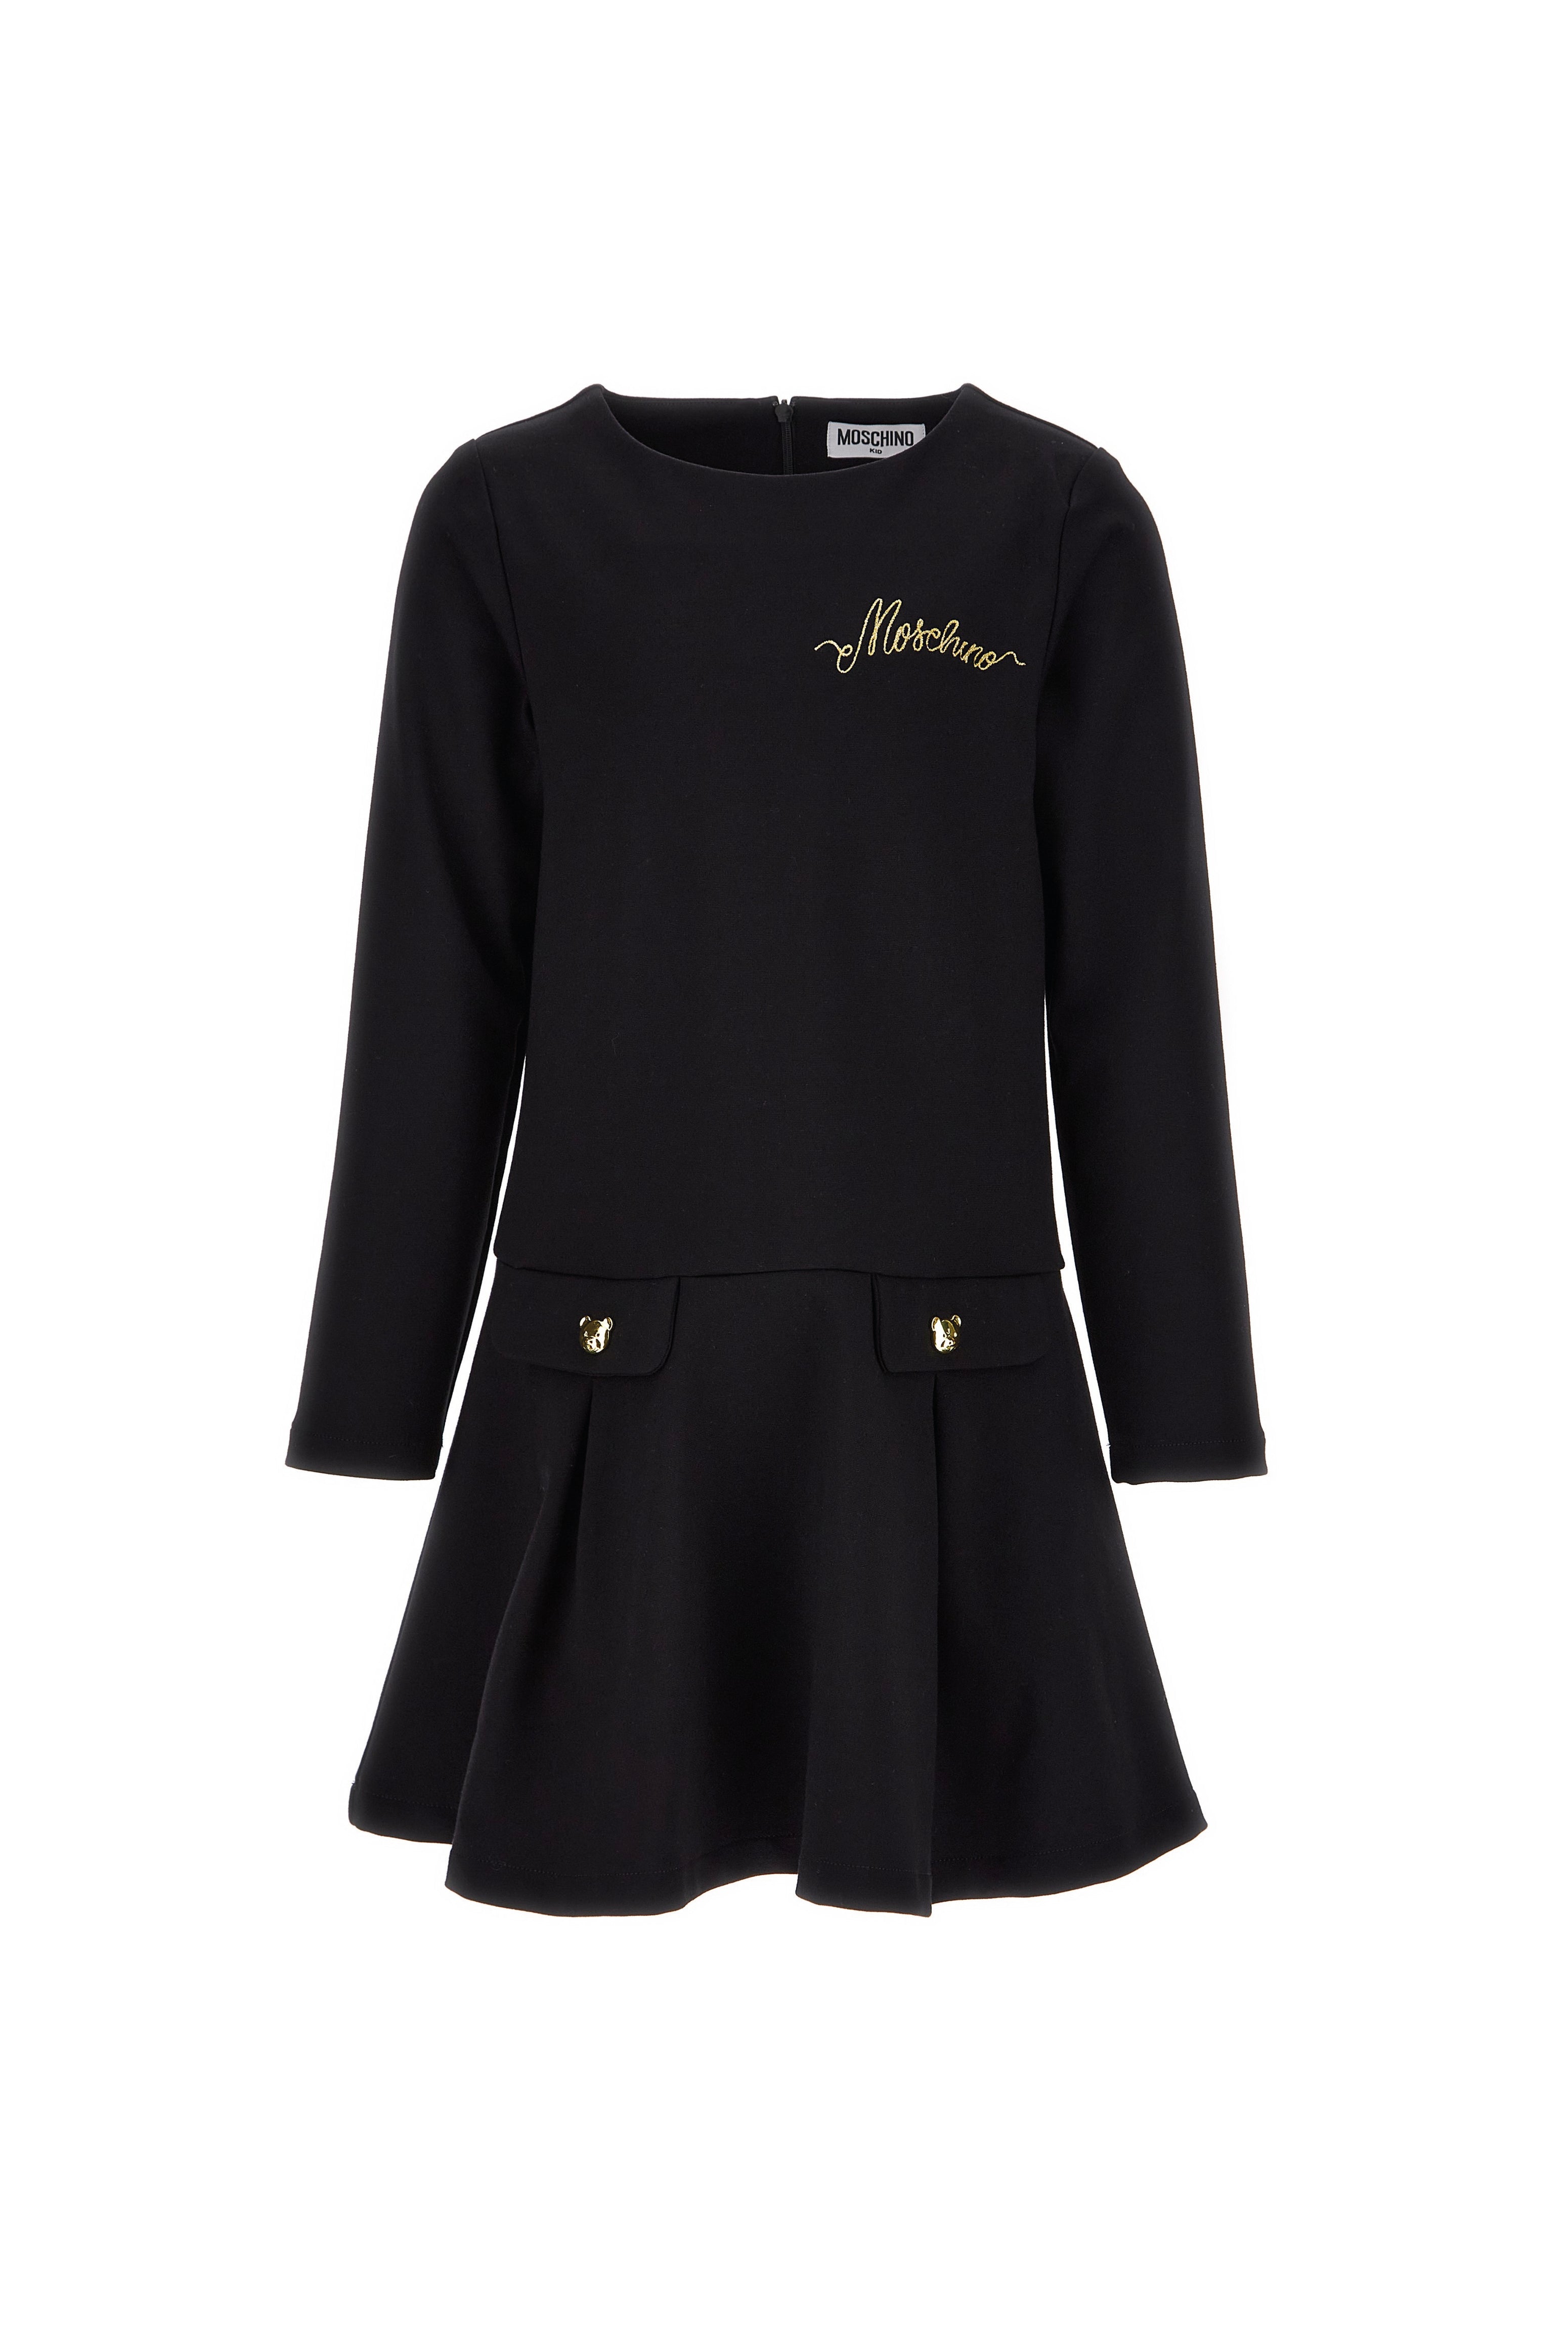 MOSCHINO LS DRESS WITH BEAR BUTTONS ON POCKETS